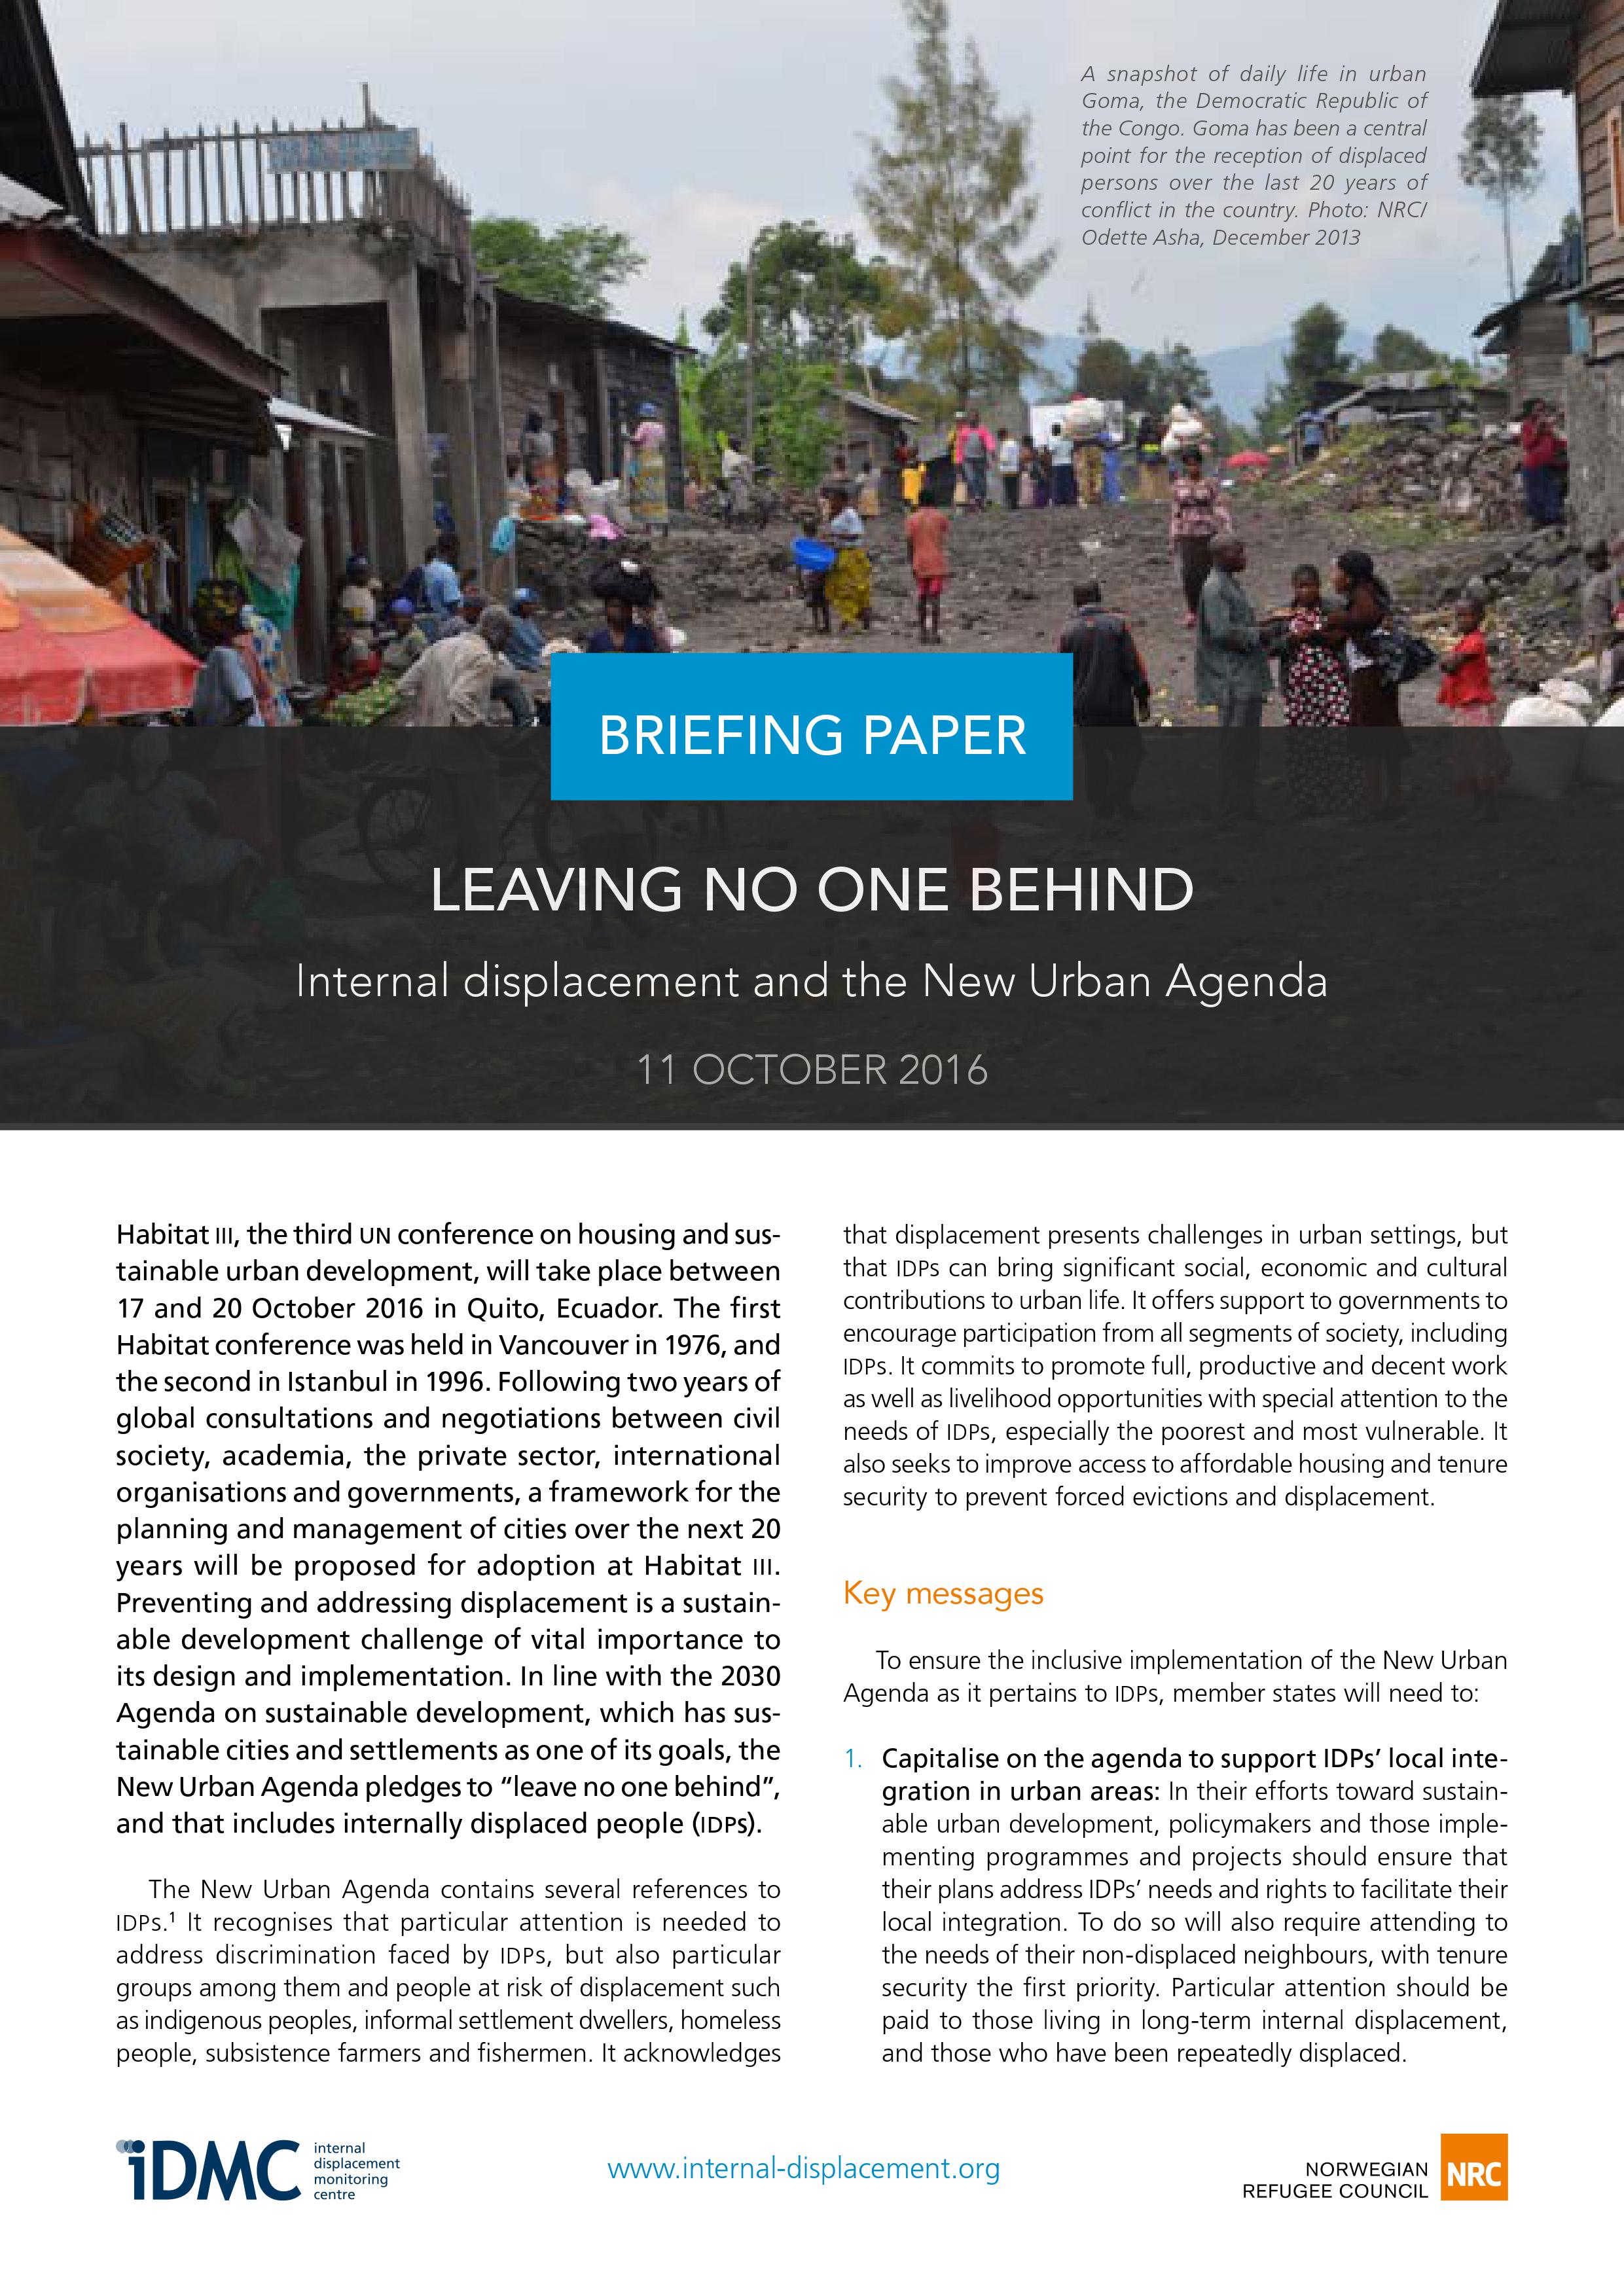 Leaving no one behind: internal displacement and the New Urban Agenda